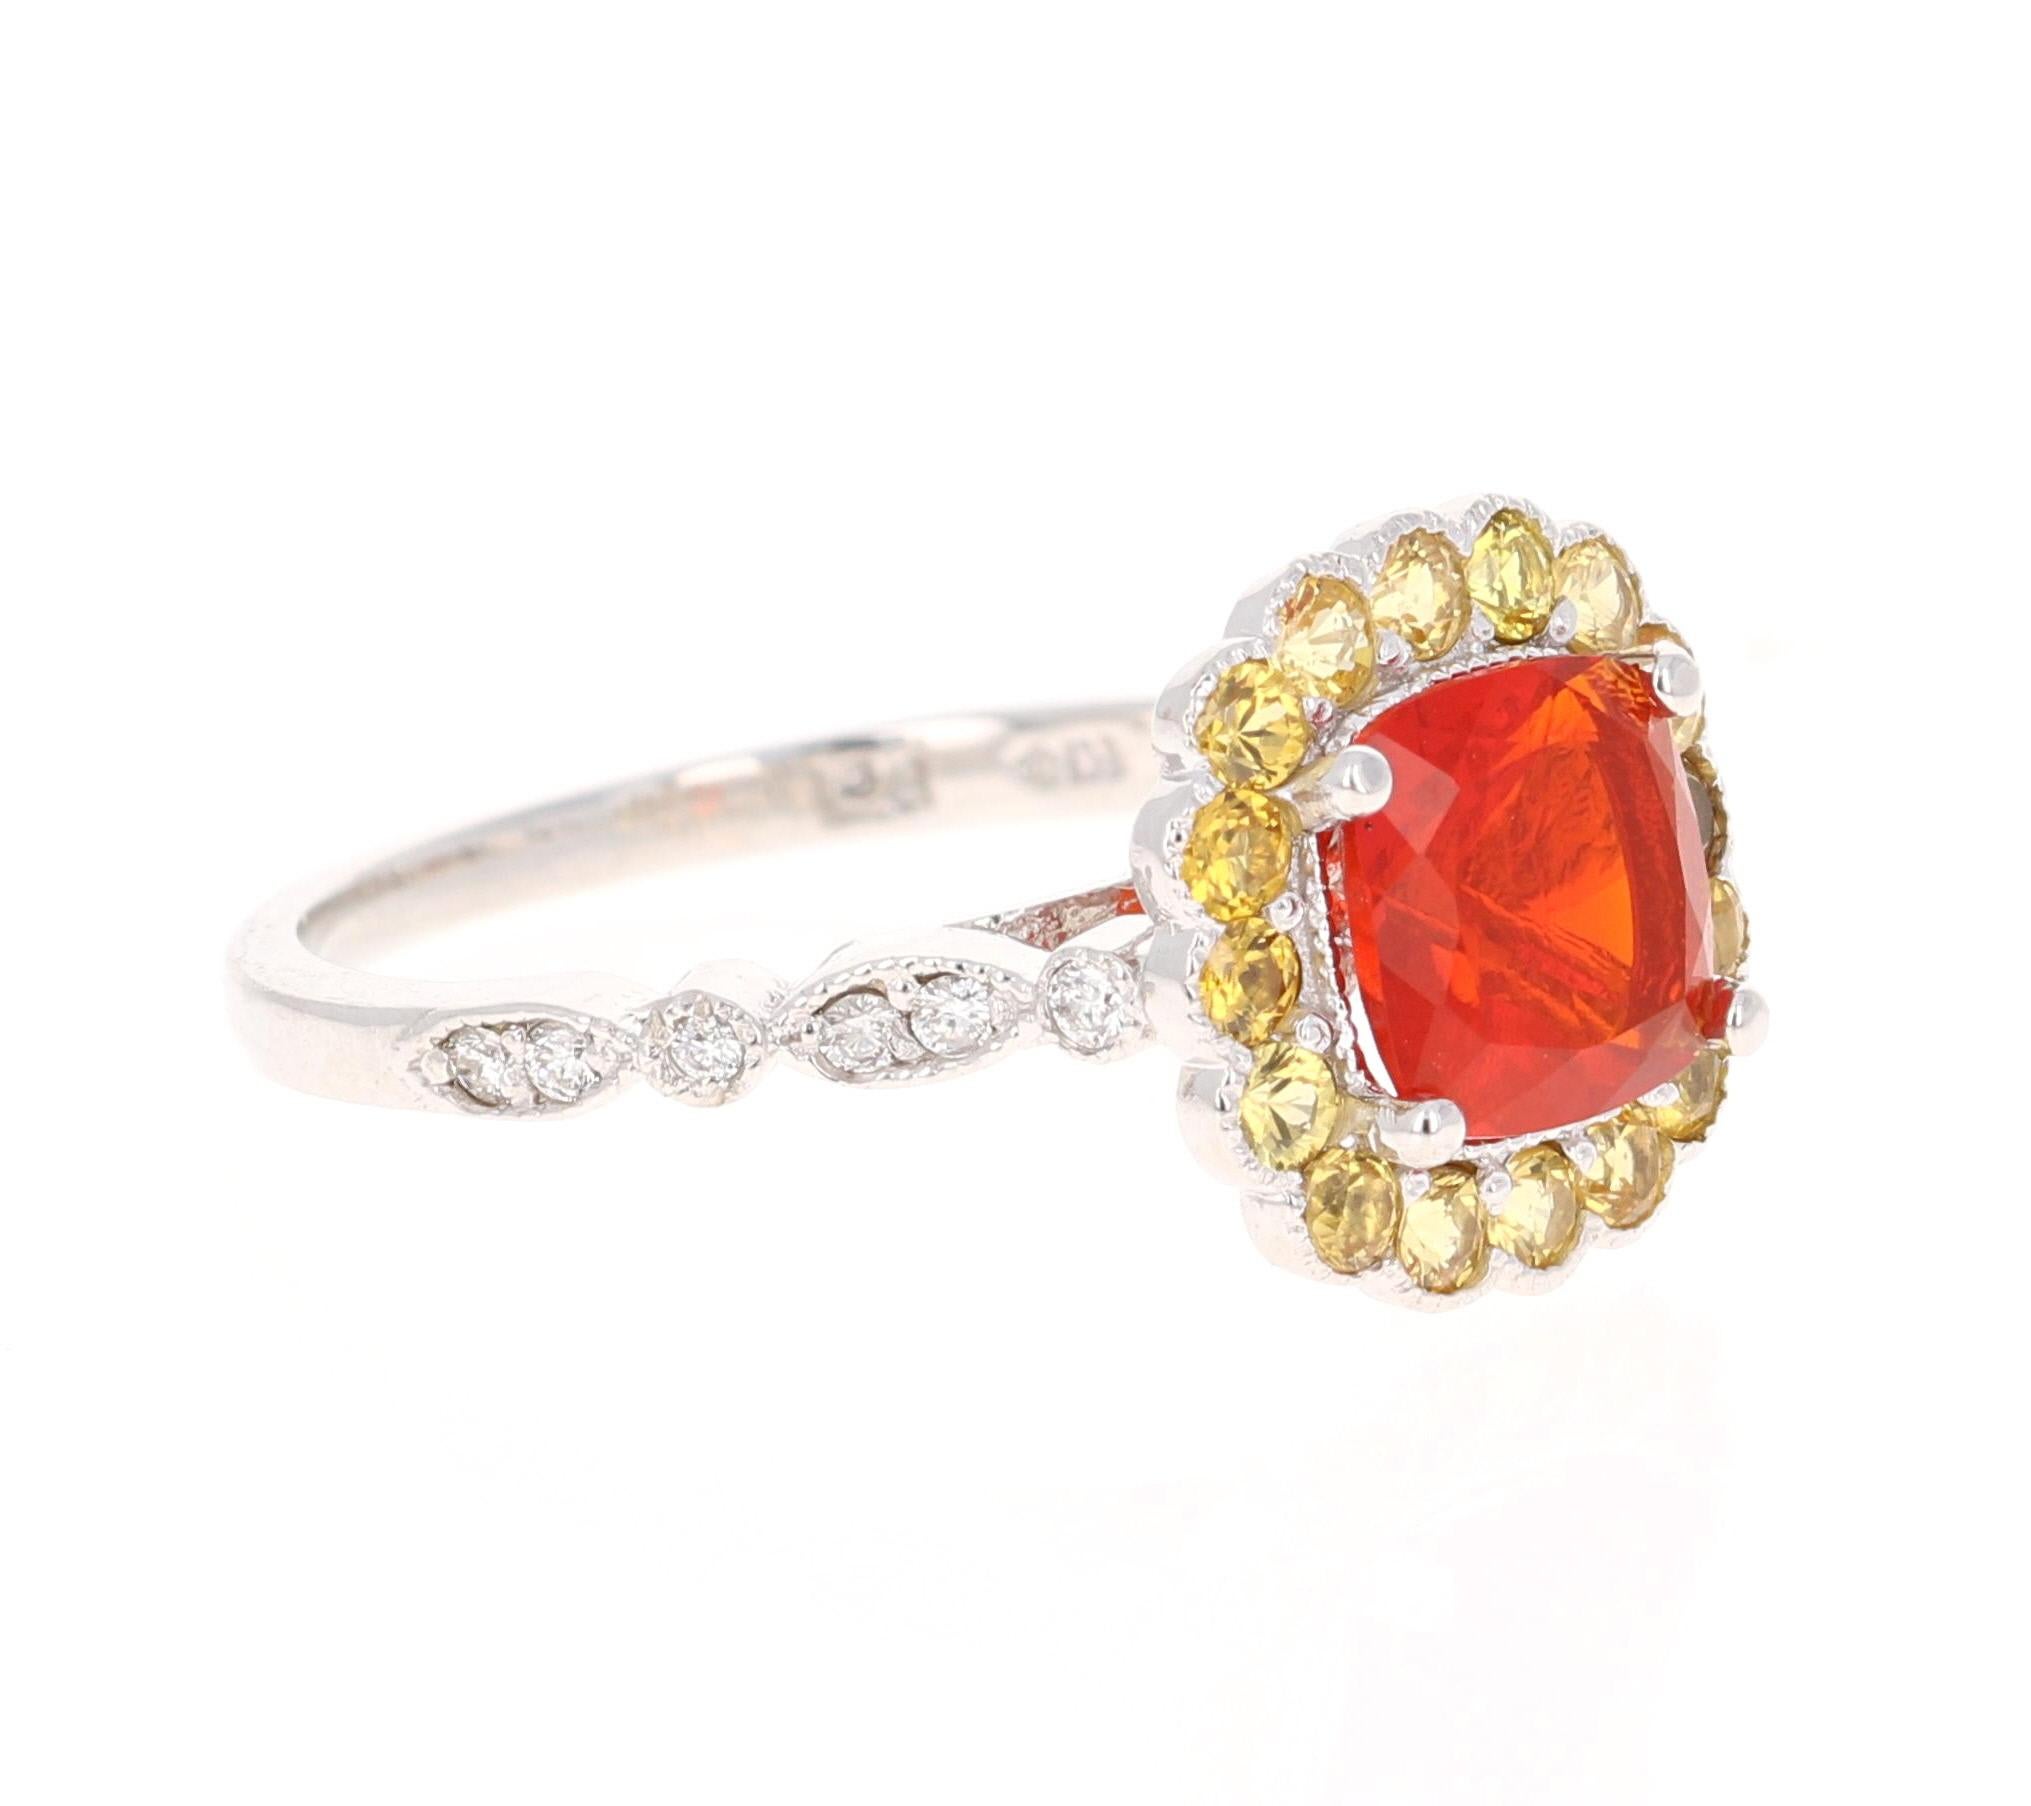 1.79 Carat Cushion Cut Fire Opal Diamond 14 Karat White Gold Ring

This uniquely designed ring has a 0.97 carat Cushion Cut Fire Opal in the center of the ring.  The Fire Opal is surrounded by 16 Round Cut Yellow Sapphires that weigh 0.69 carats and